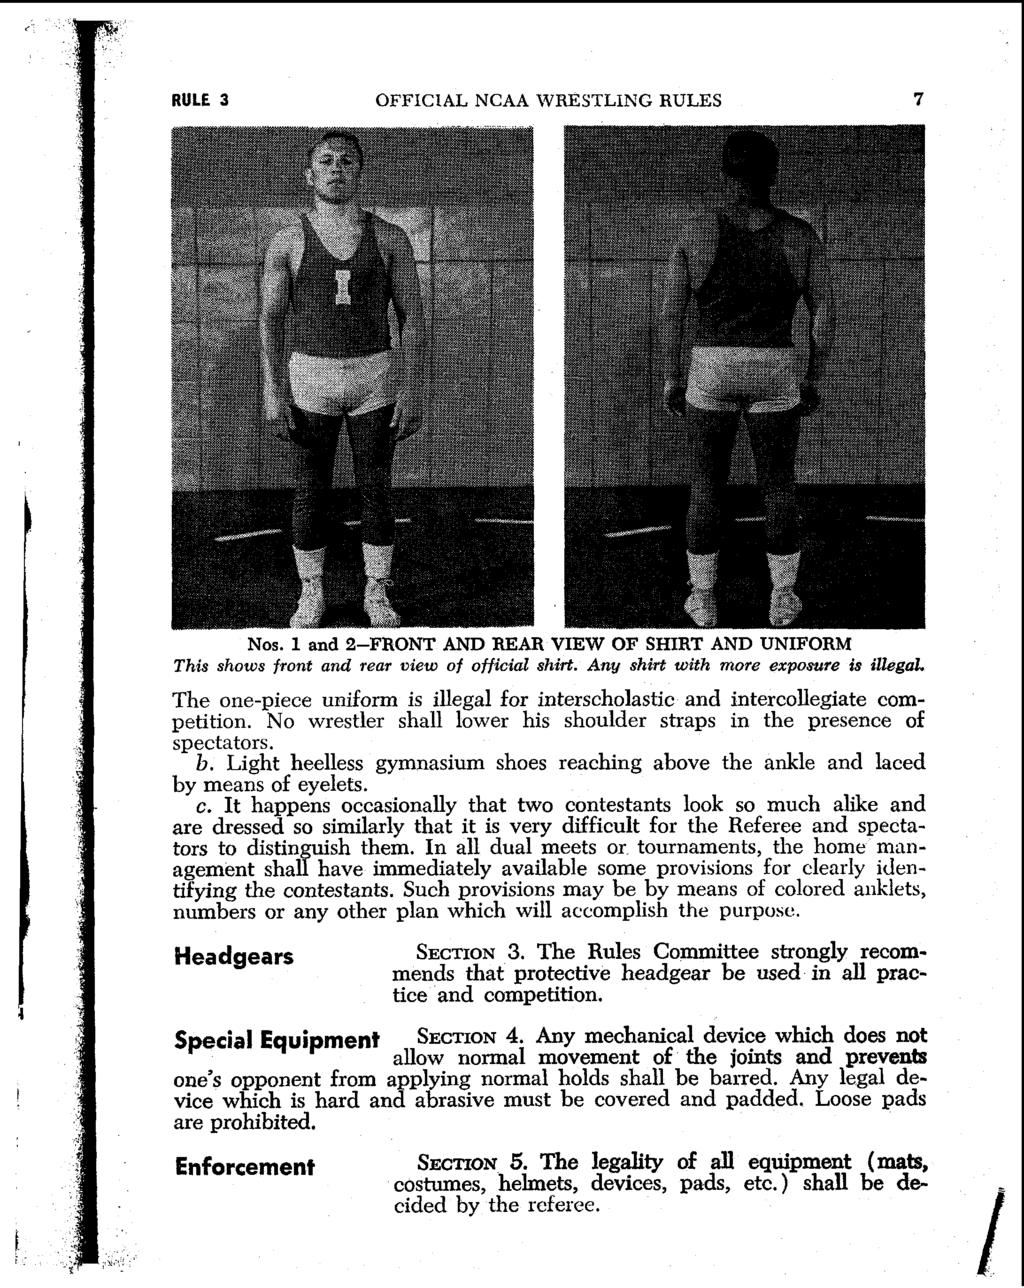 RULE 3 OFFXClAL NCAA WRESTLING RULES 7 Nos. 1 and 2-FRONT AND REAR VIEW OF SHIRT AND UNIFORM This shows front and Tear view of official shirt. Any shirt with more exposure is &gal.